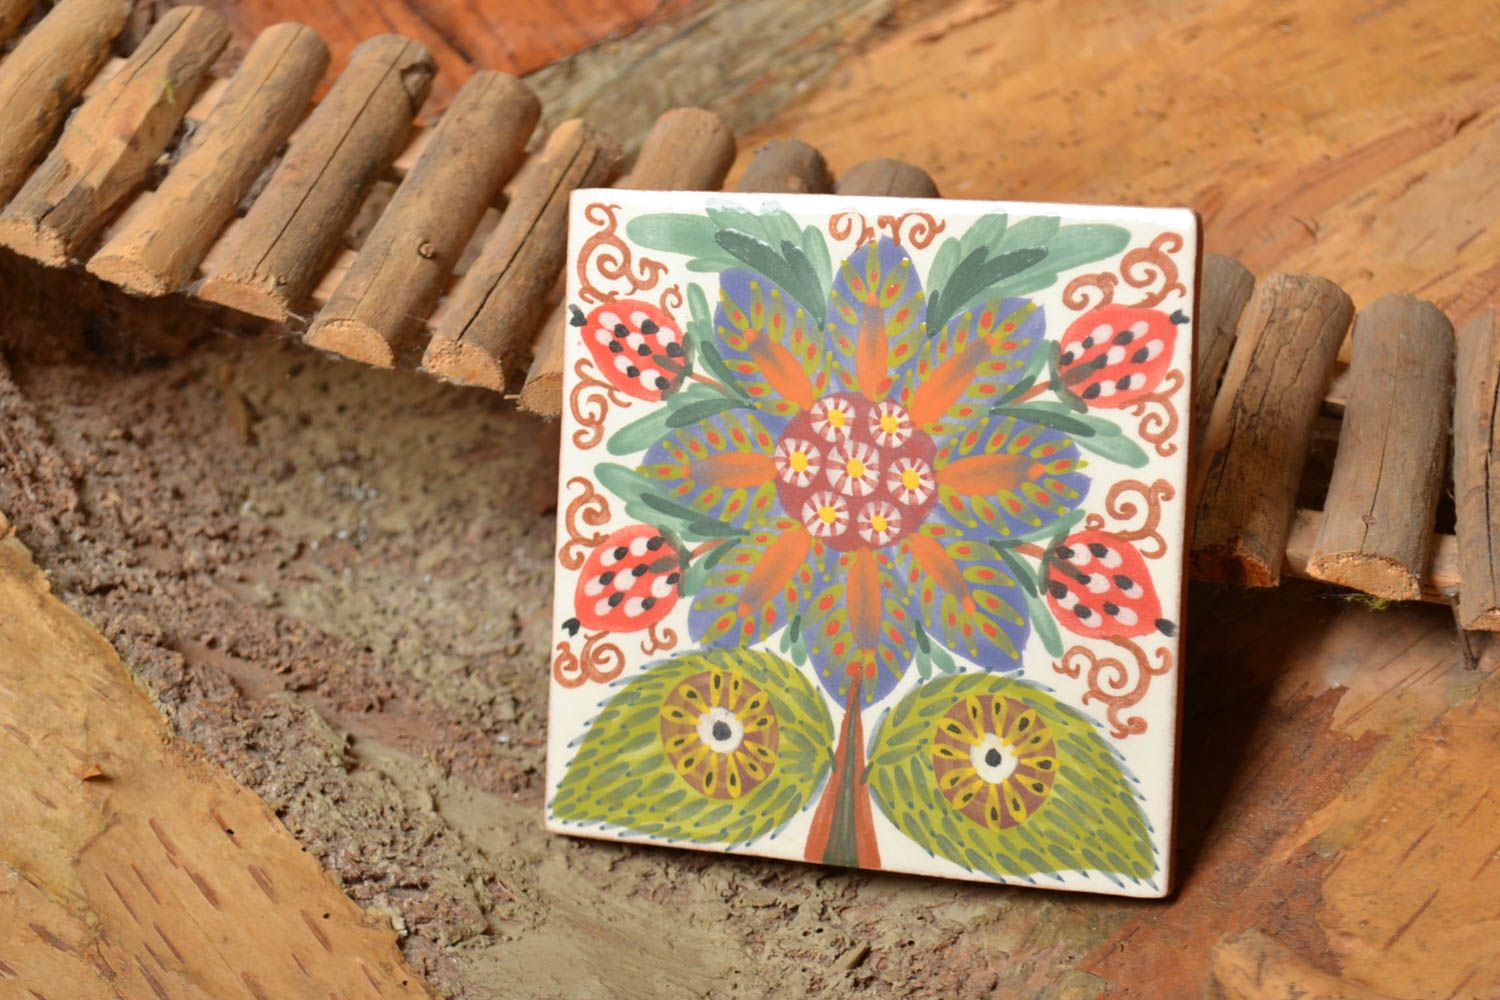 Handmade decorative ceramic tile painted with engobes with colorful flower image photo 1